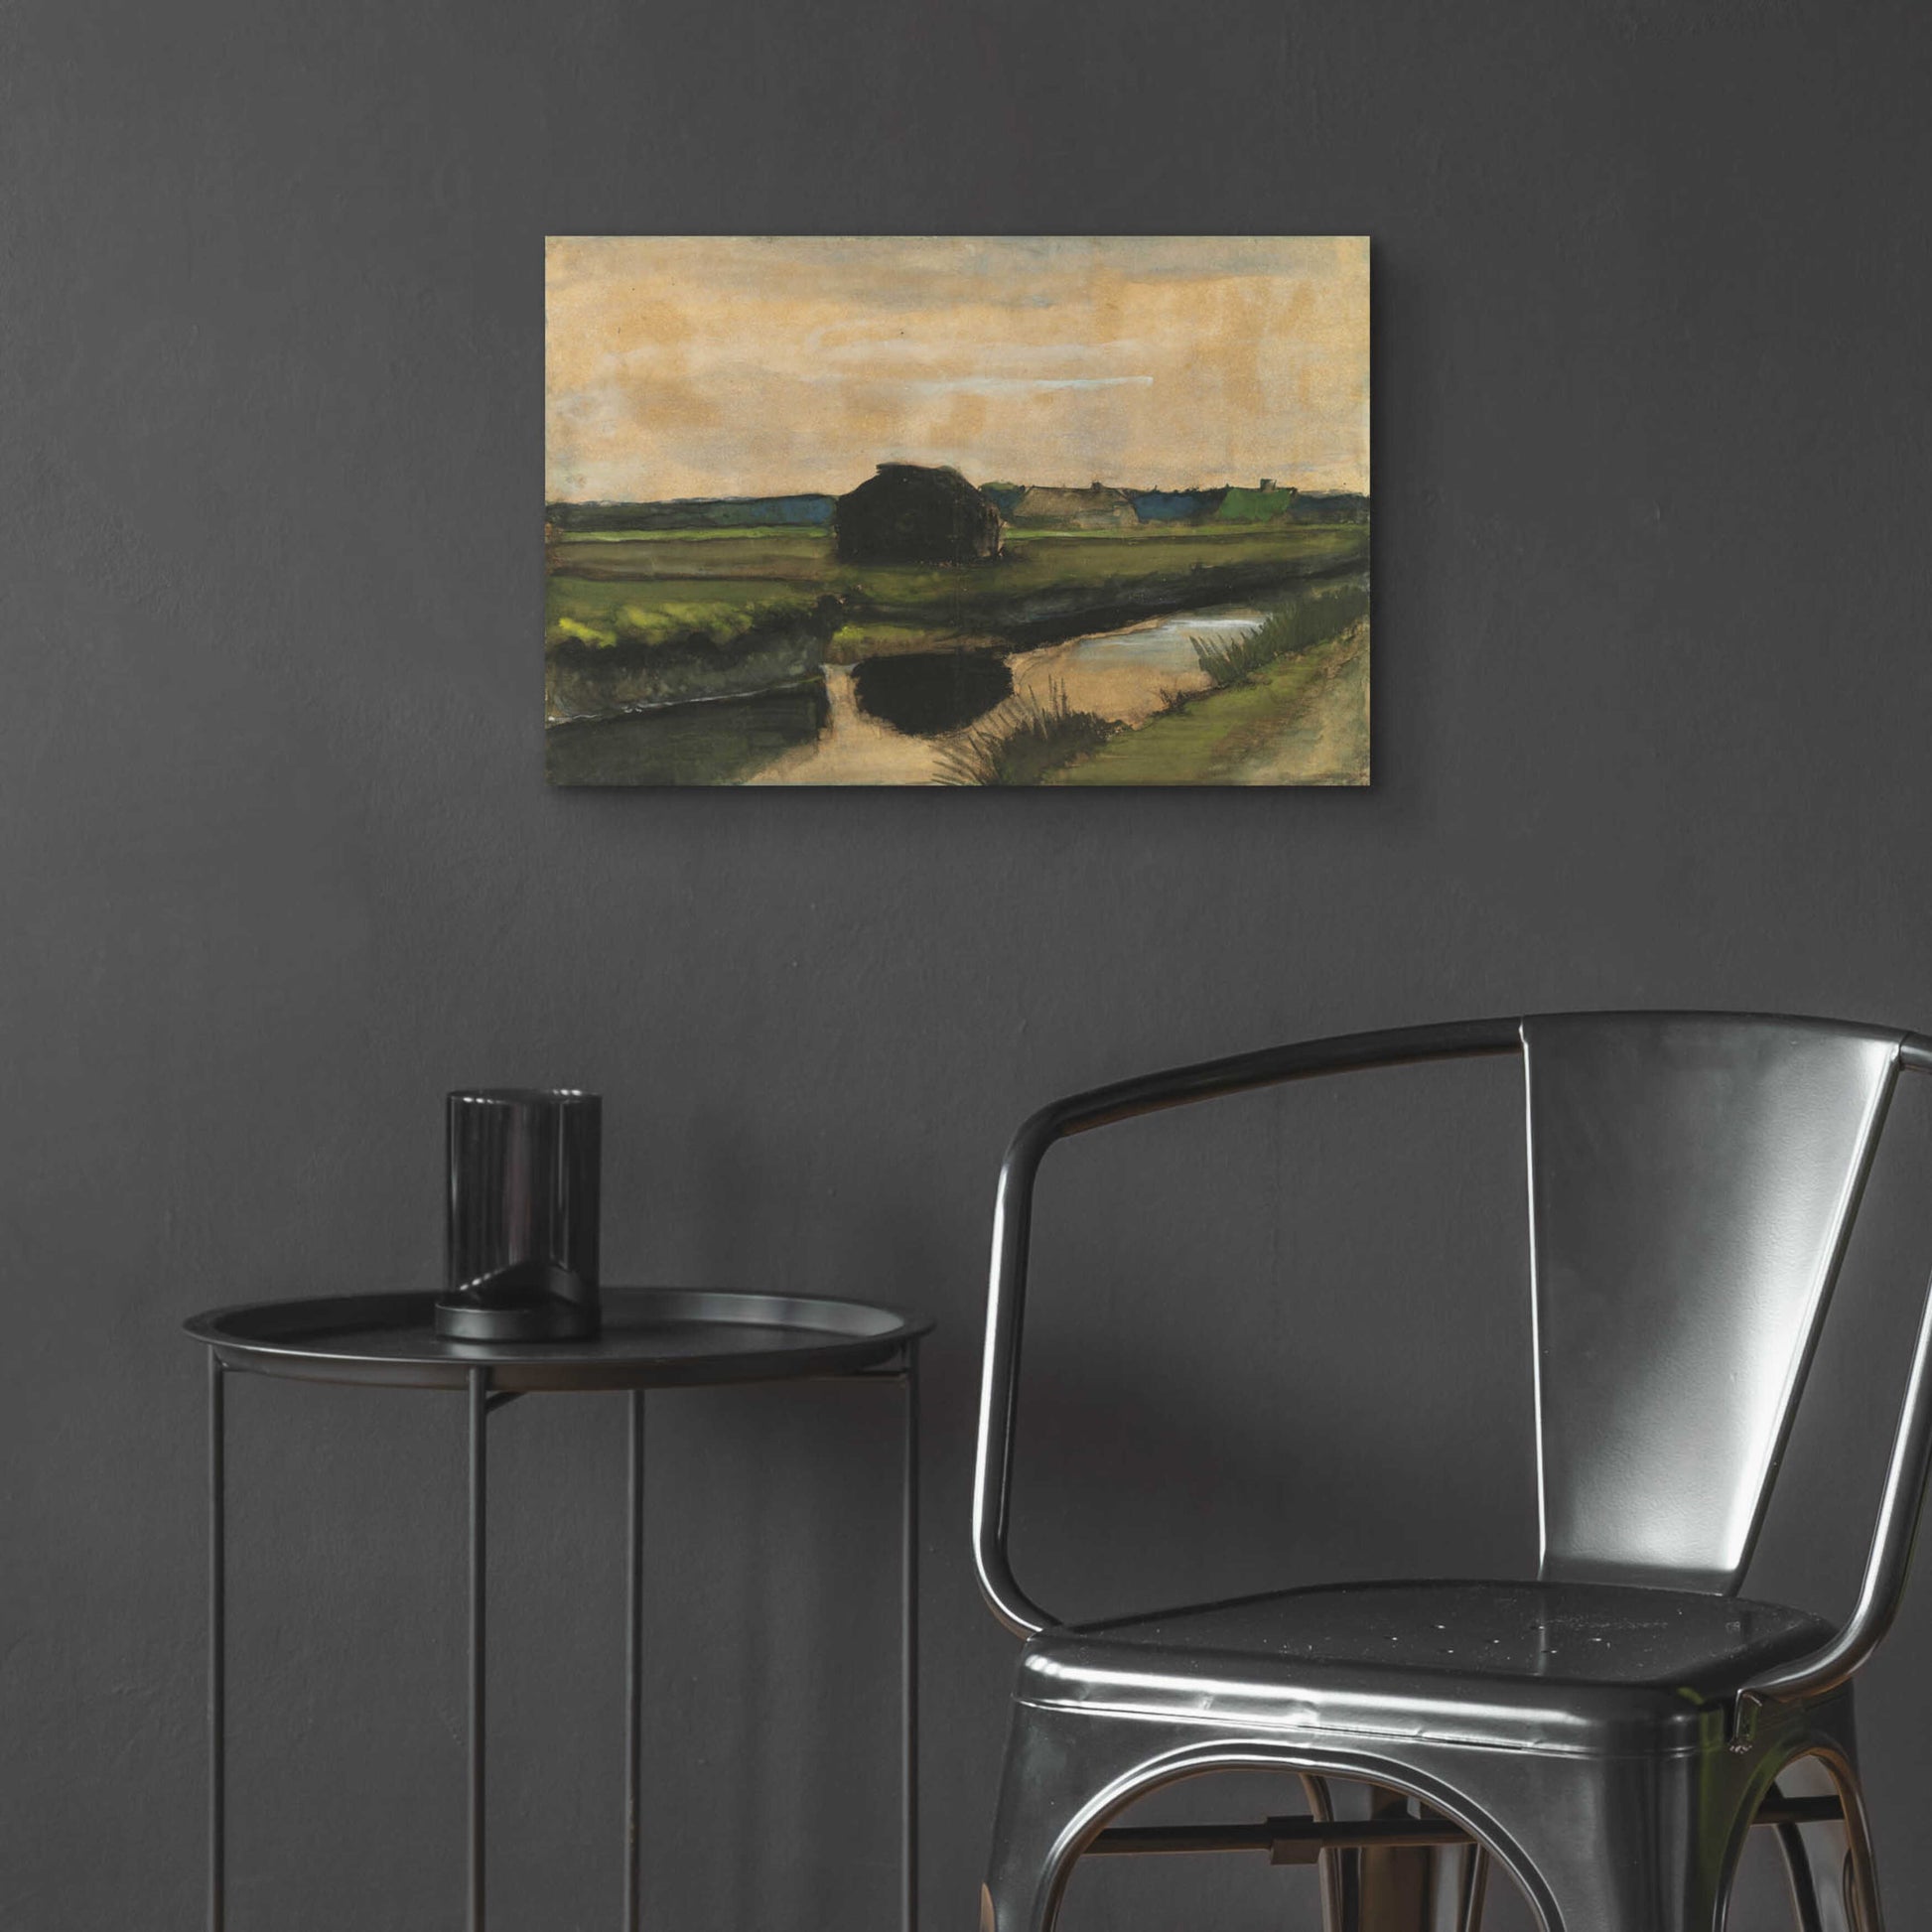 Epic Art 'Landscape With A Stack Of Peat And Farmhouses' by Vincent Van Gogh, Acrylic Glass Wall Art,24x16